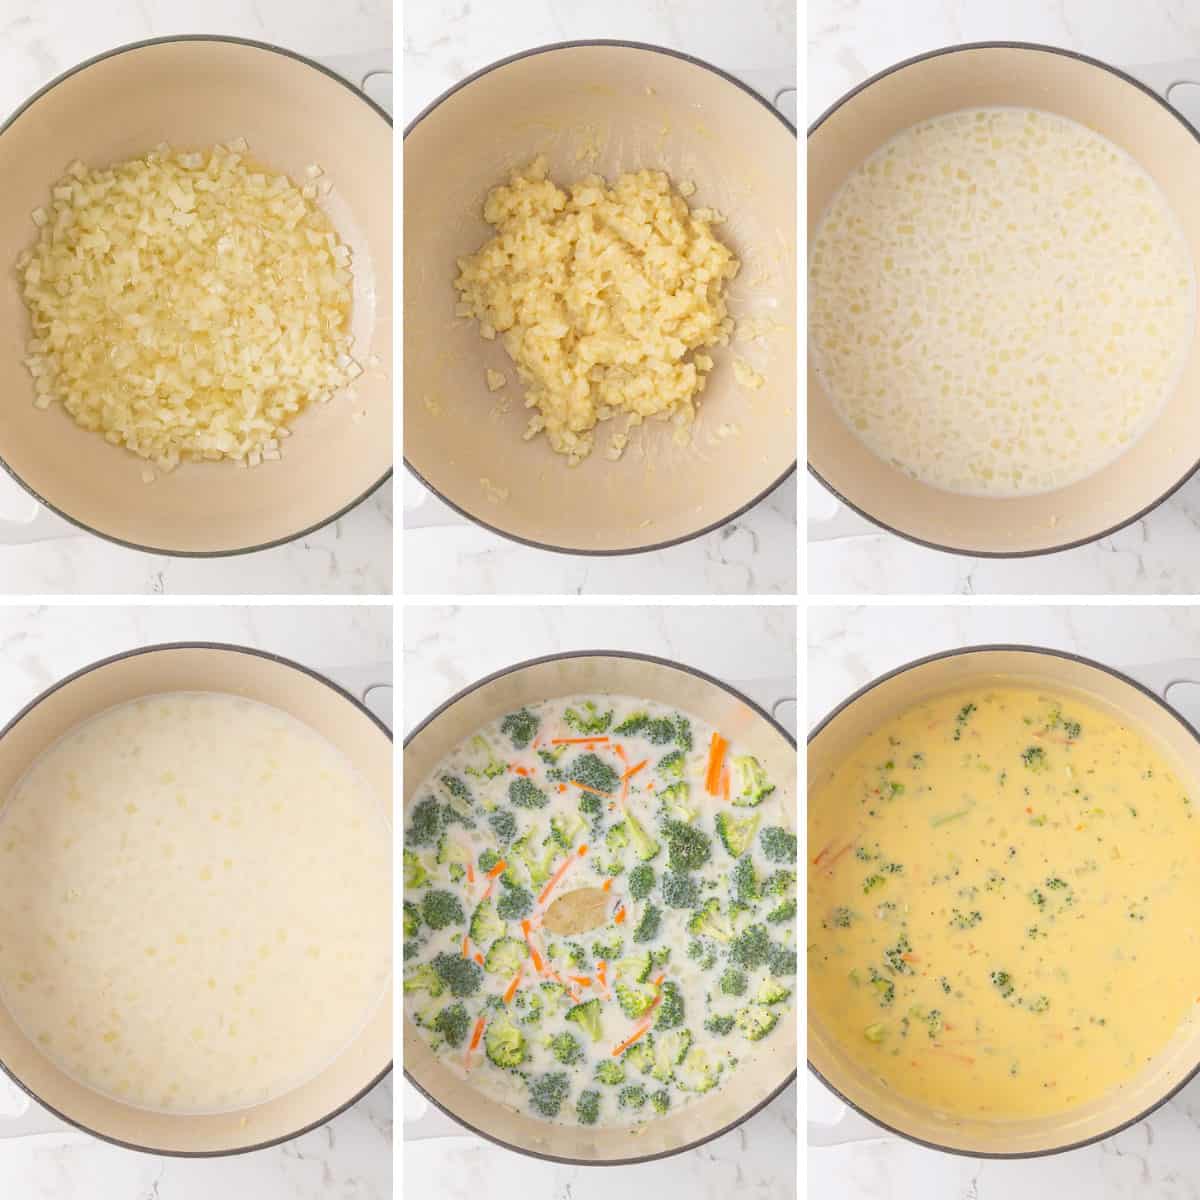 Steps showing how to make low fat broccoli cheddar soup.